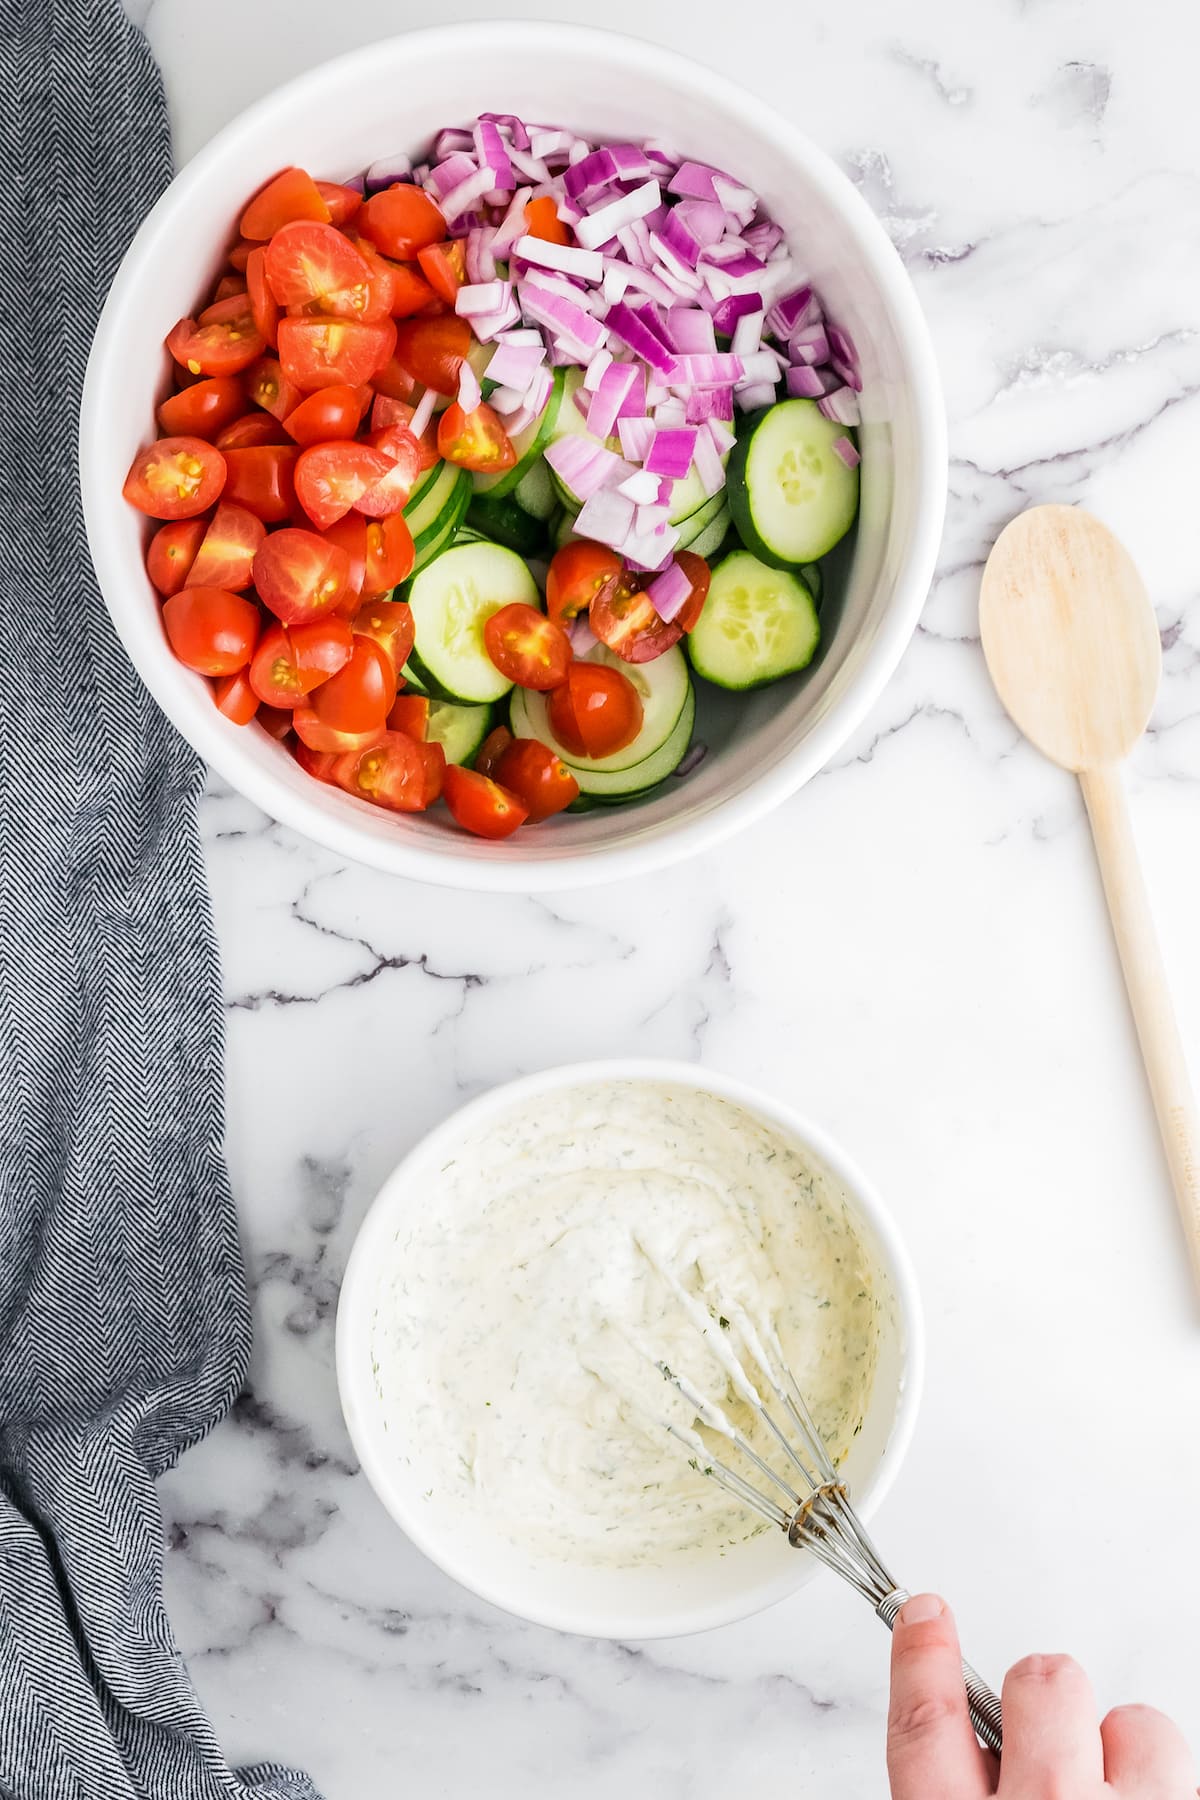 a bowl of fresh salad vegetables alongside another bowl with creamy dressing